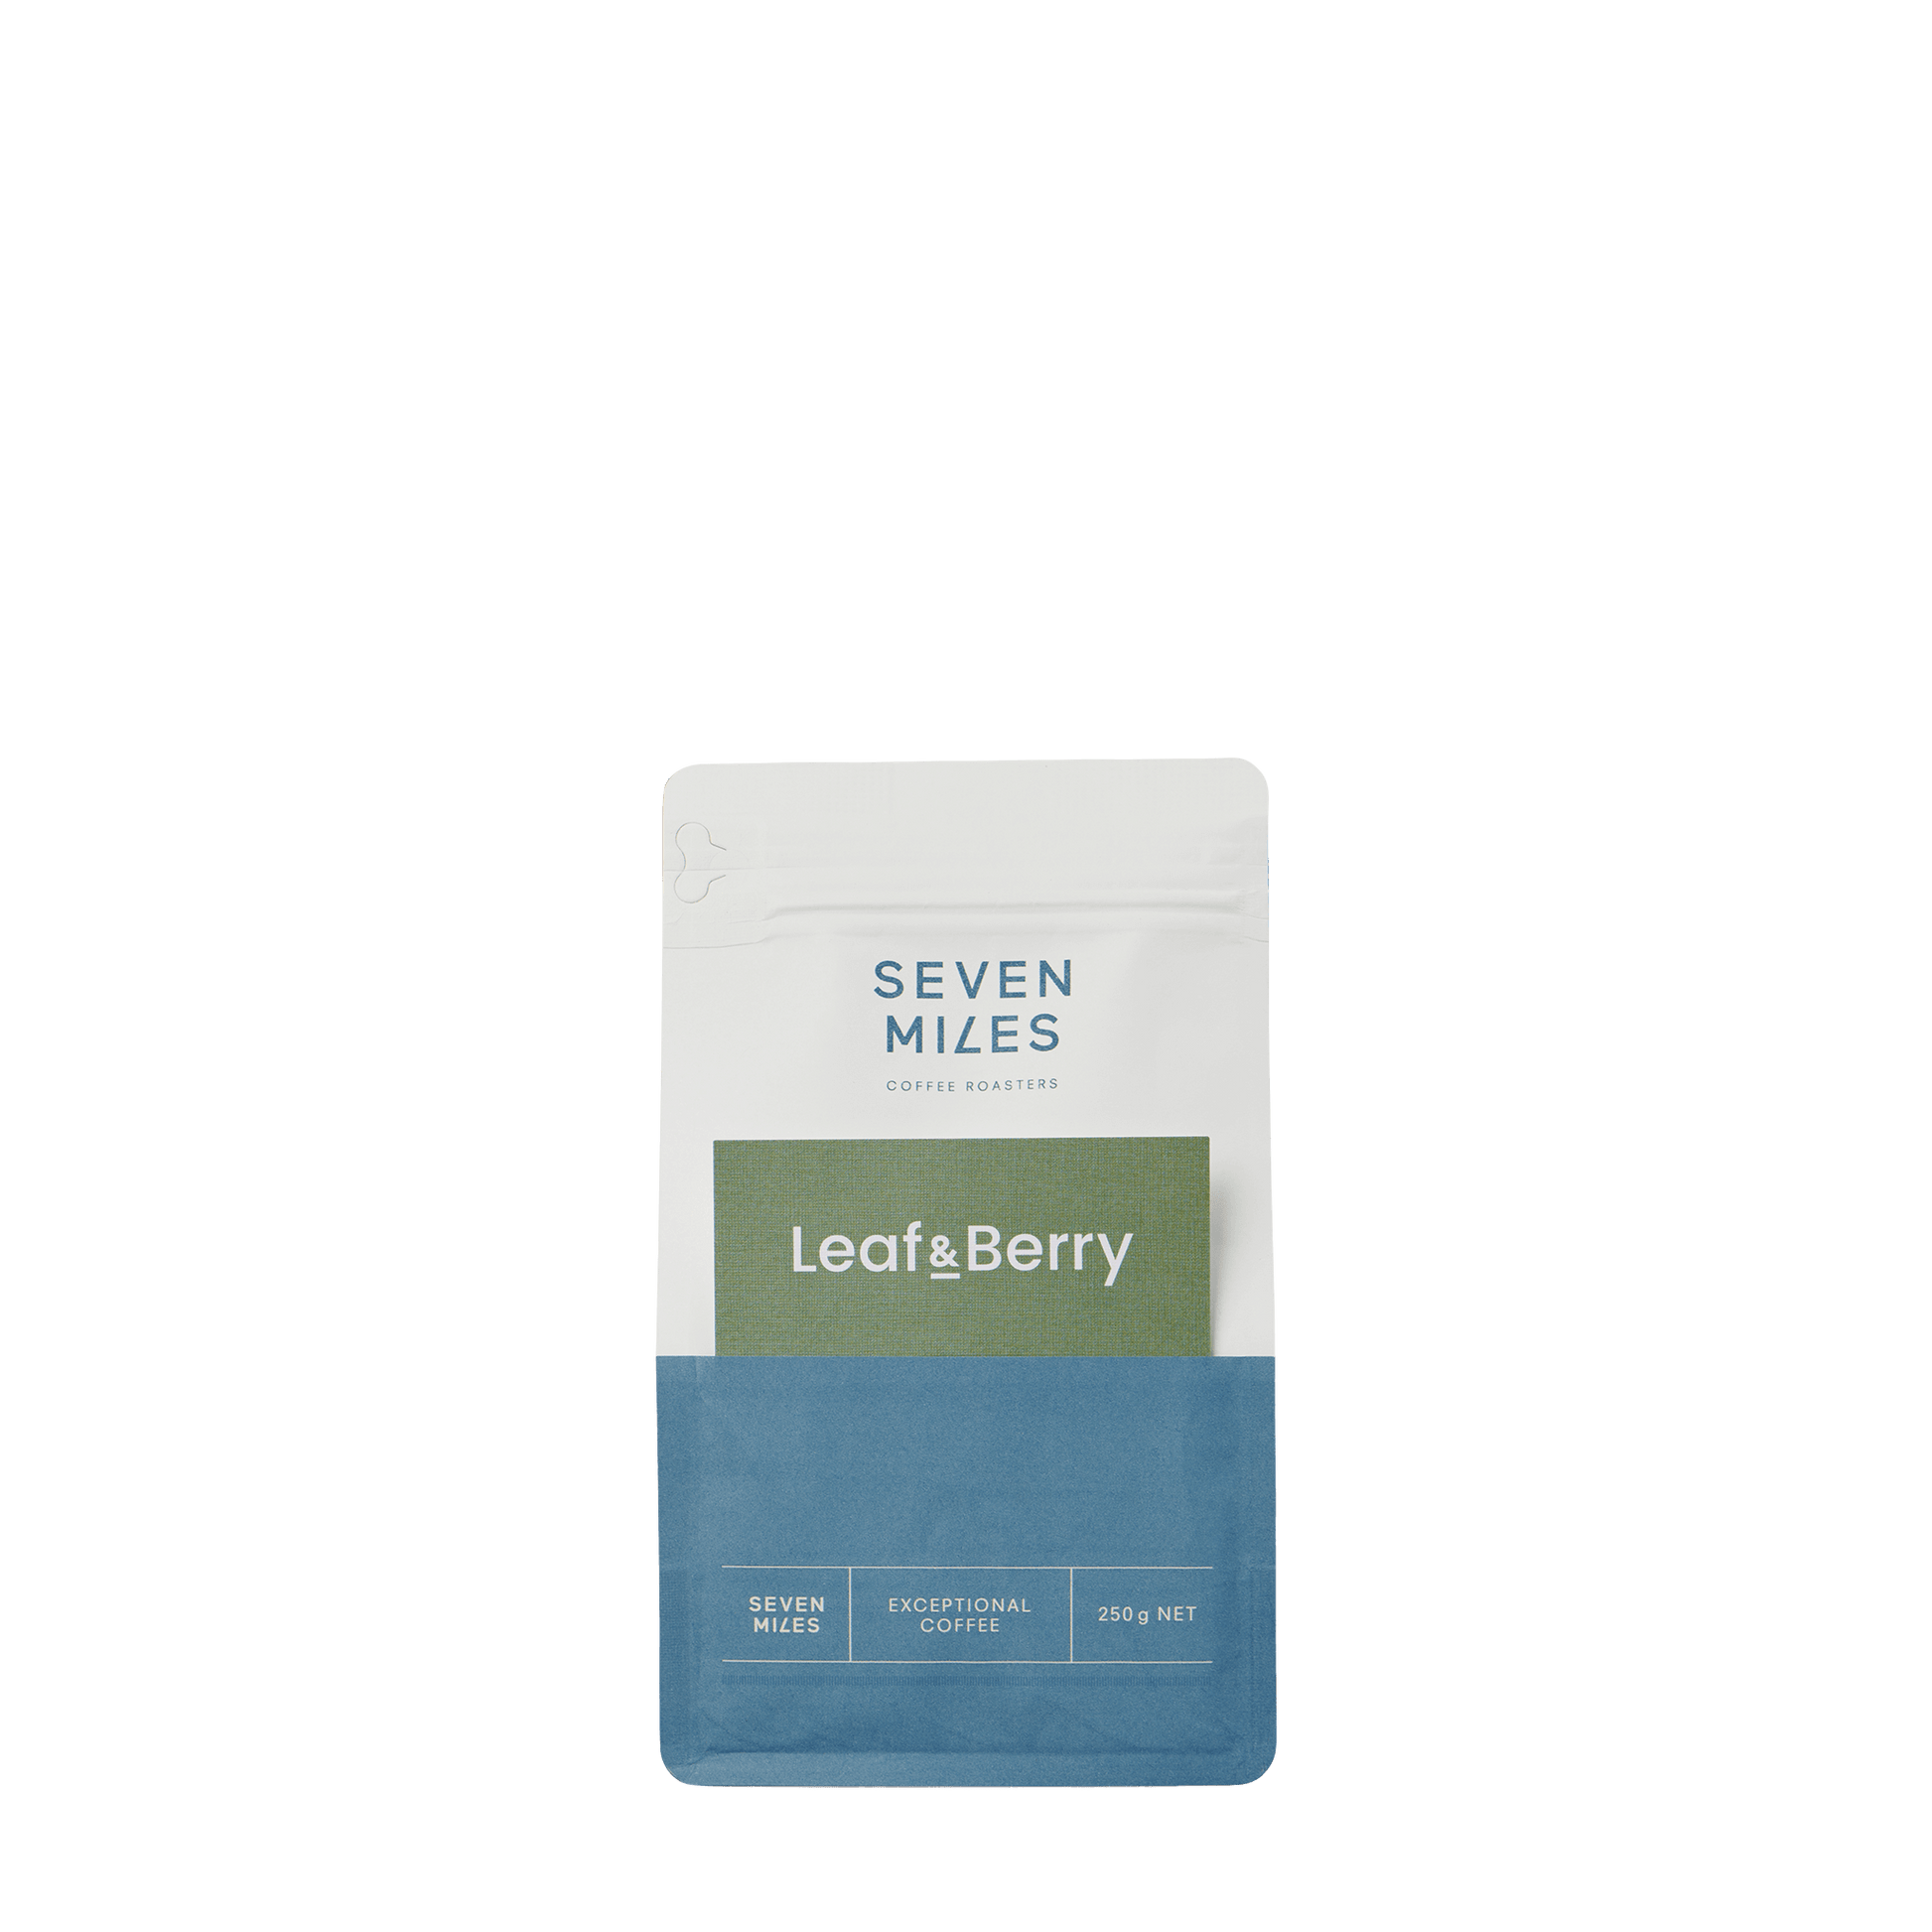 Leaf & Berry 250g is a blend of 100% certified Fairtrade and organic coffees. Our roaster uses a light/medium roast profile to reveal the delicate citrus notes with sweet caramel and hazelnut characteristics of these coffees. 